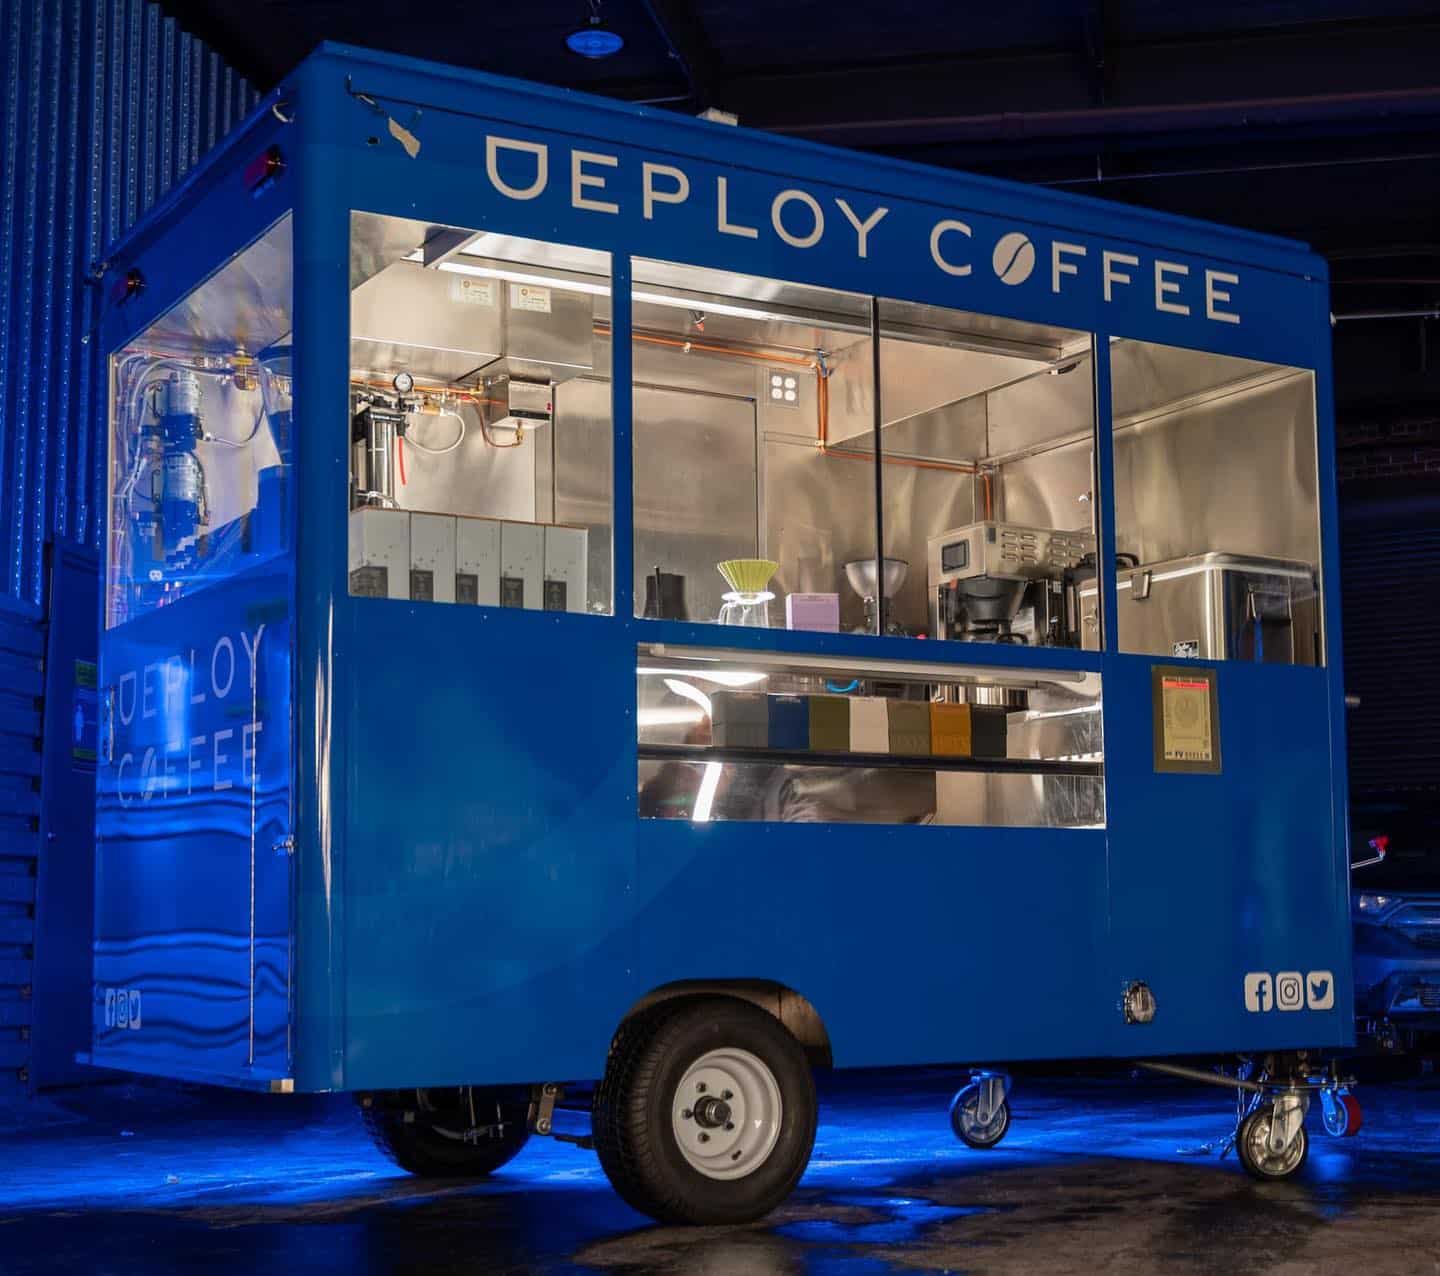 deploy coffee cart at night